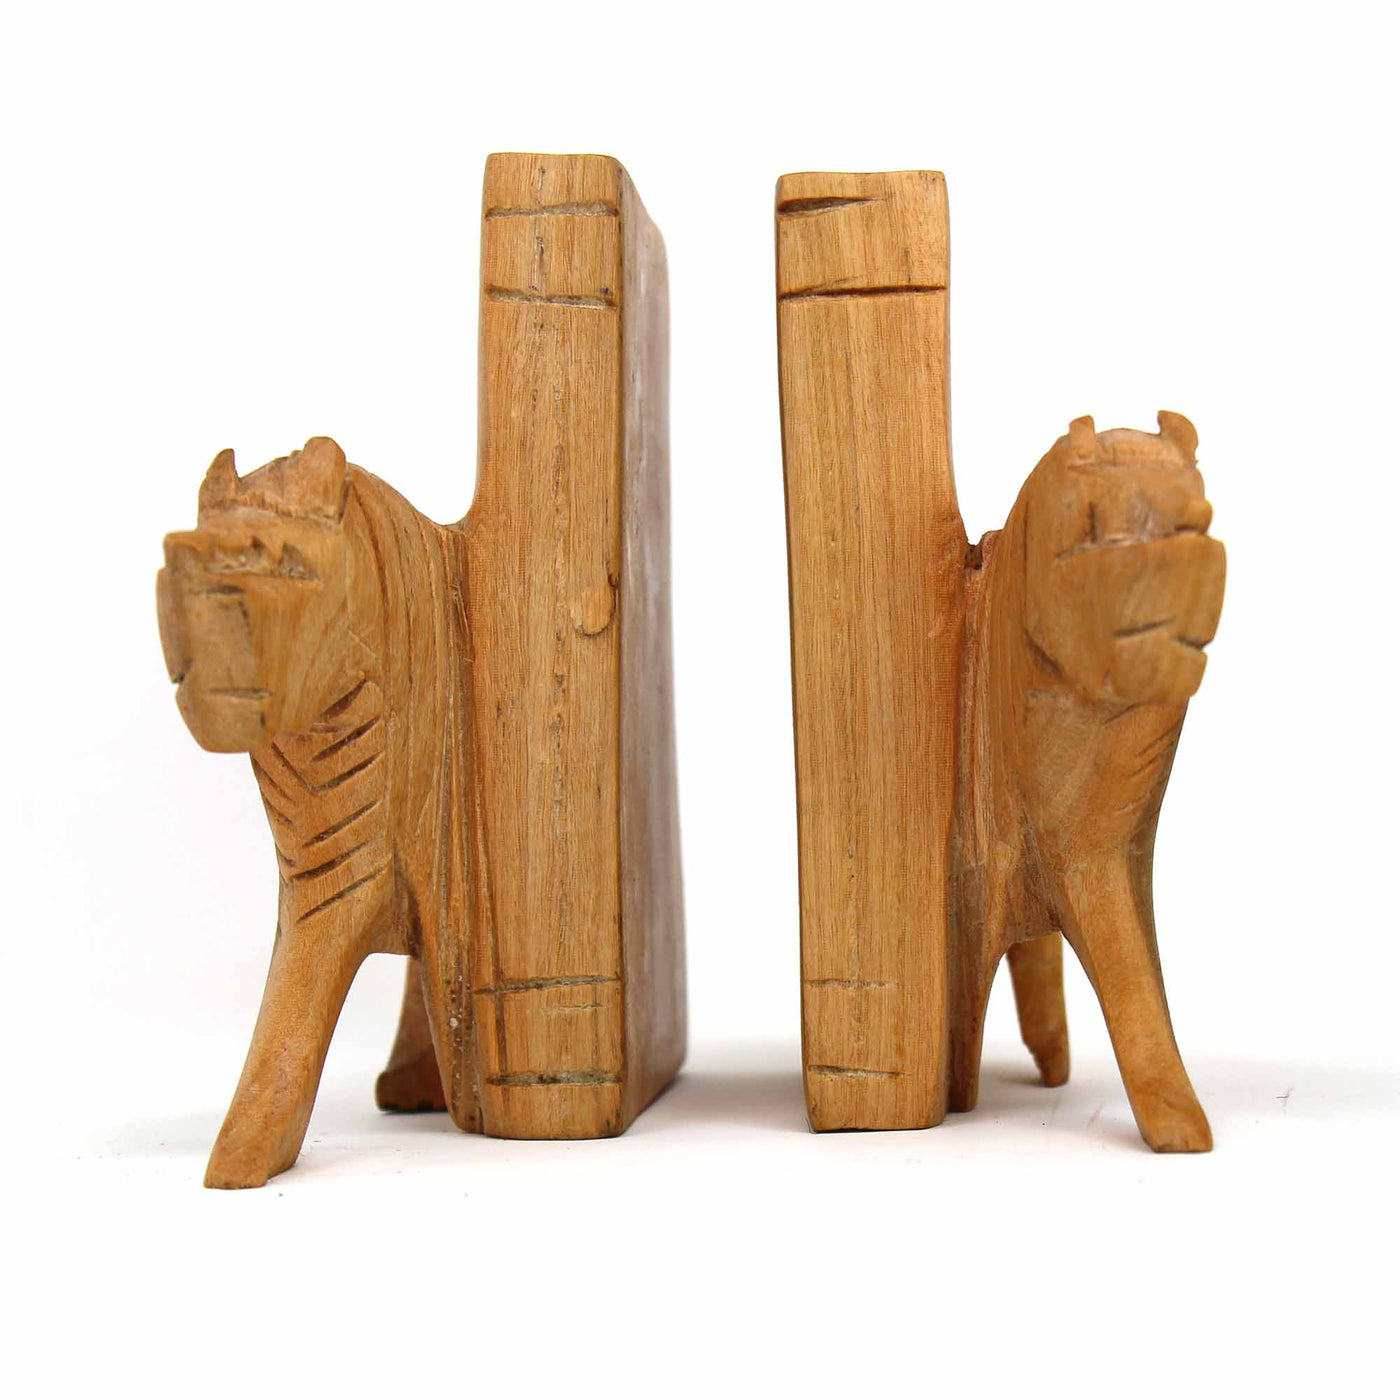 Carved Wood Lion Book Ends, Set of 2 - Yvonne’s 100th Wish Inc